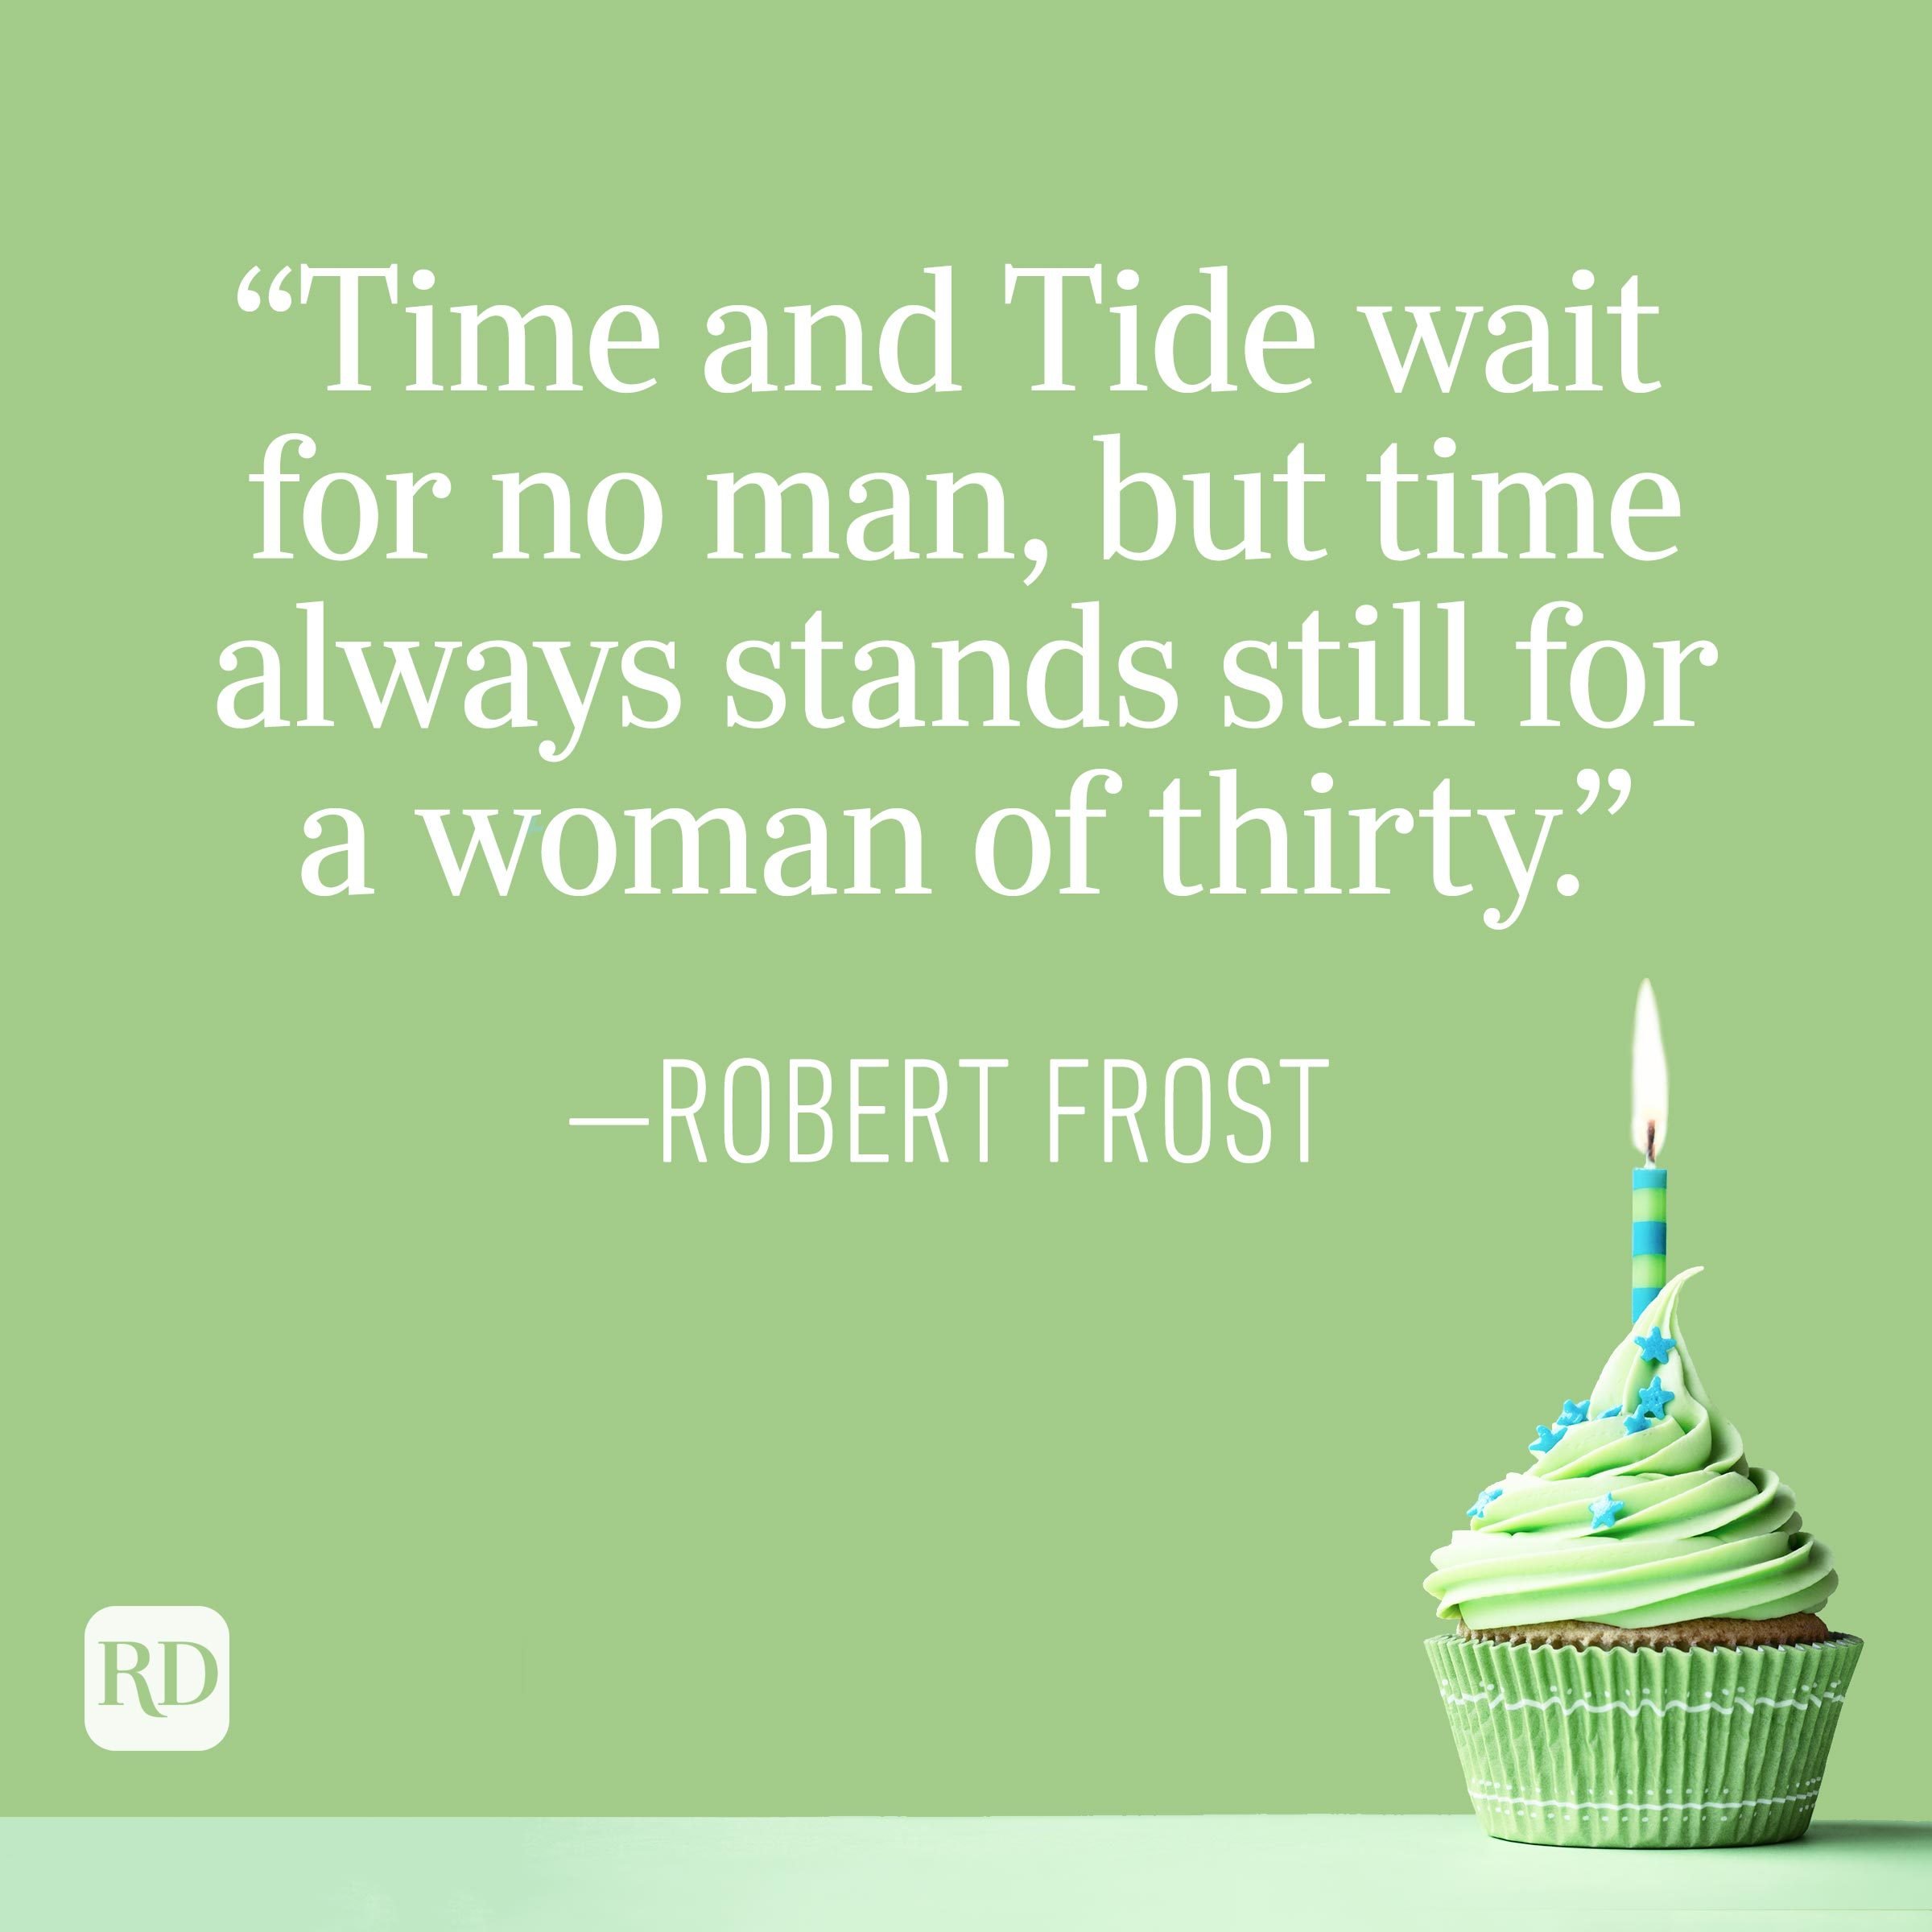 "Time and Tide wait for no man, but time always stands still for a woman of thirty." —Robert Frost